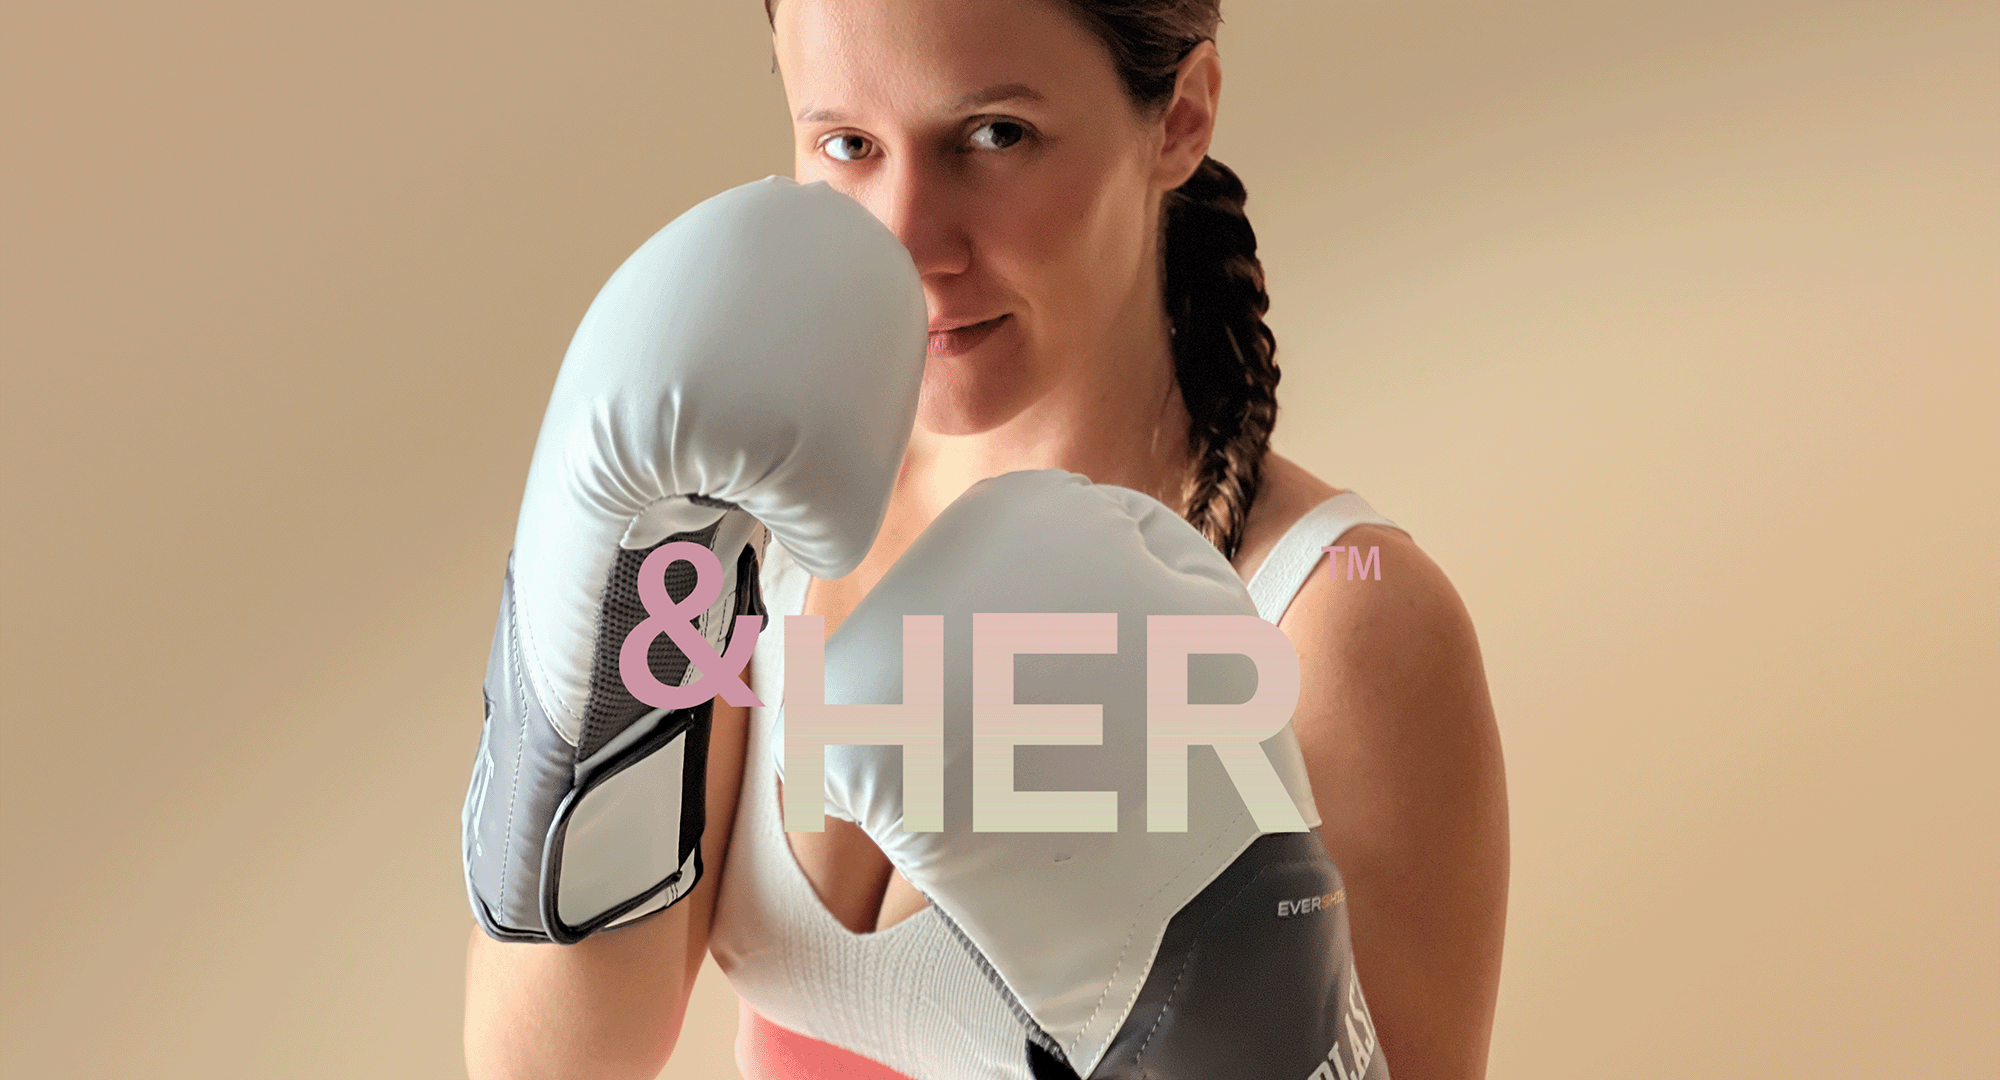 Load video: &amp;HER boxing video